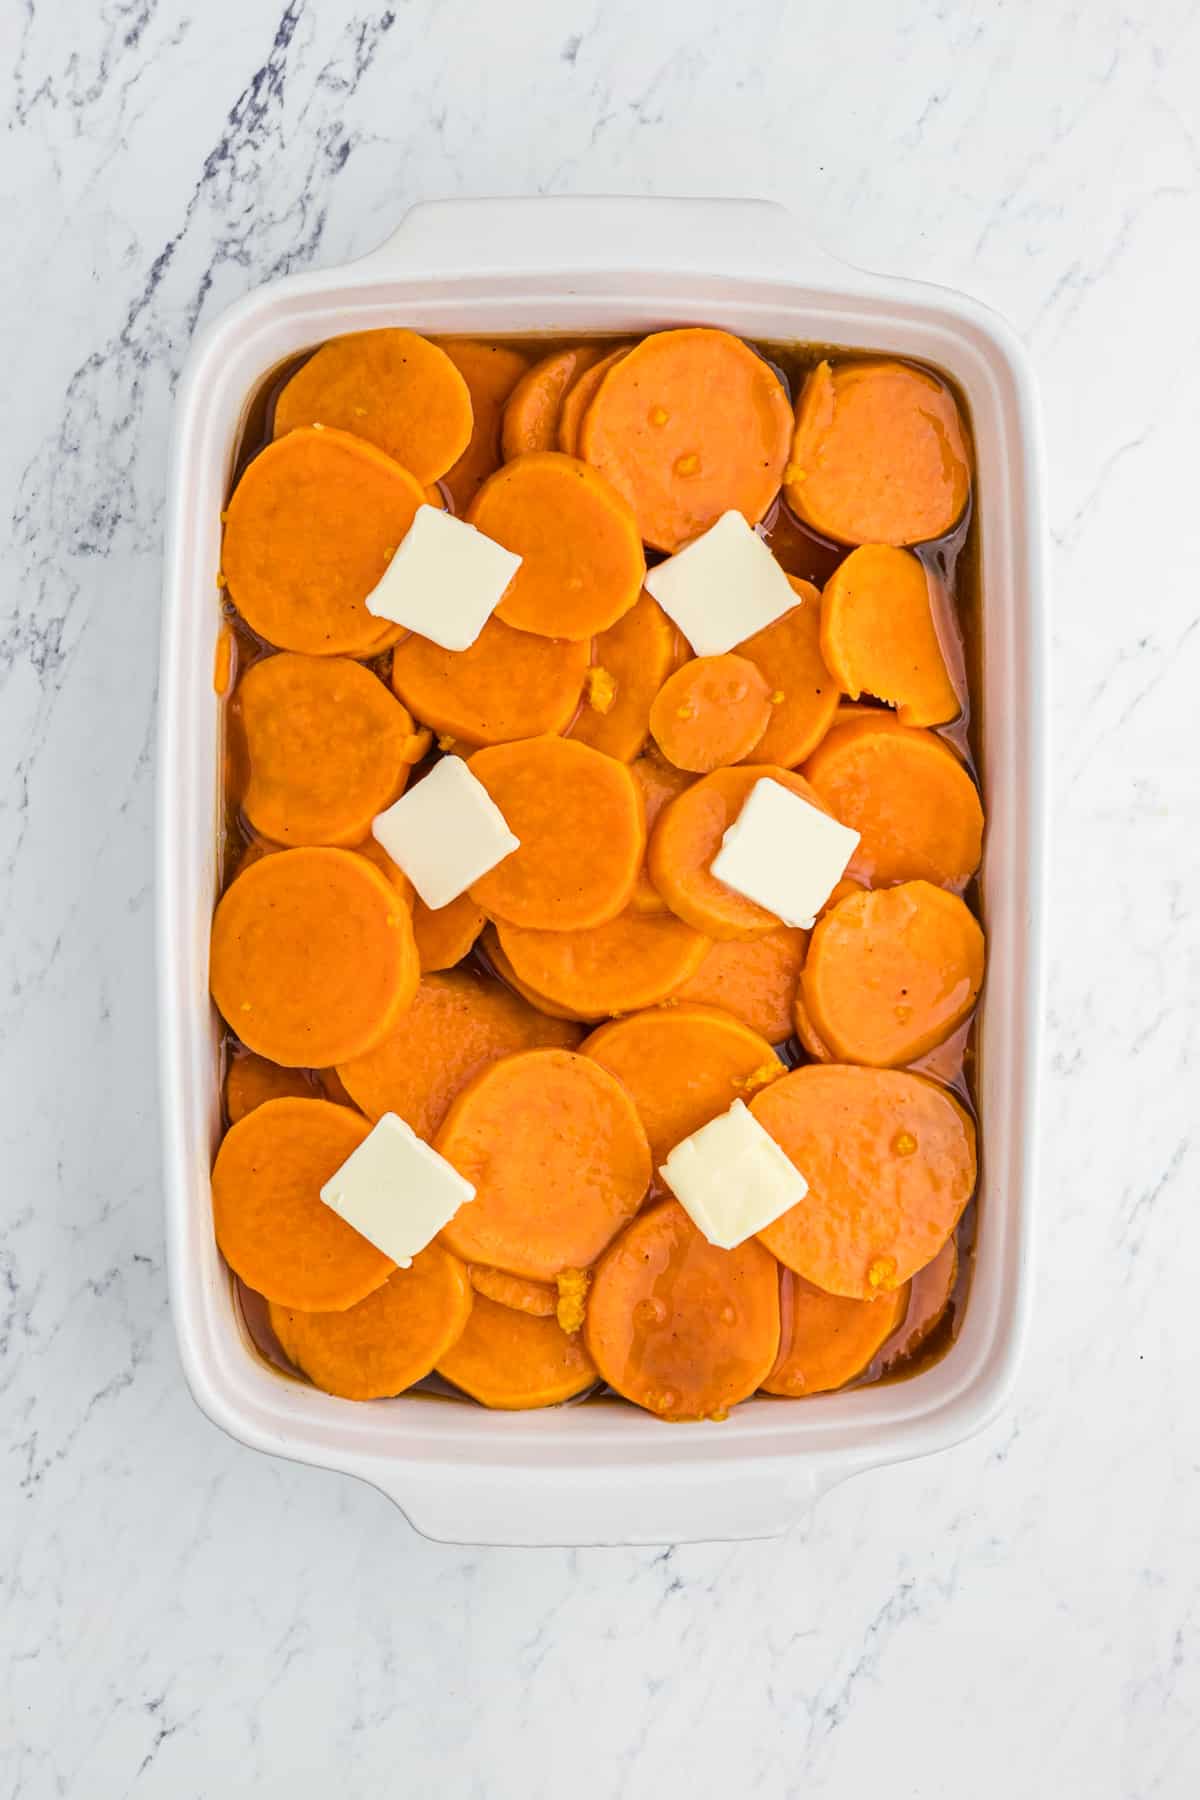 Sliced yams in a white baking dish topped with pats of butter.